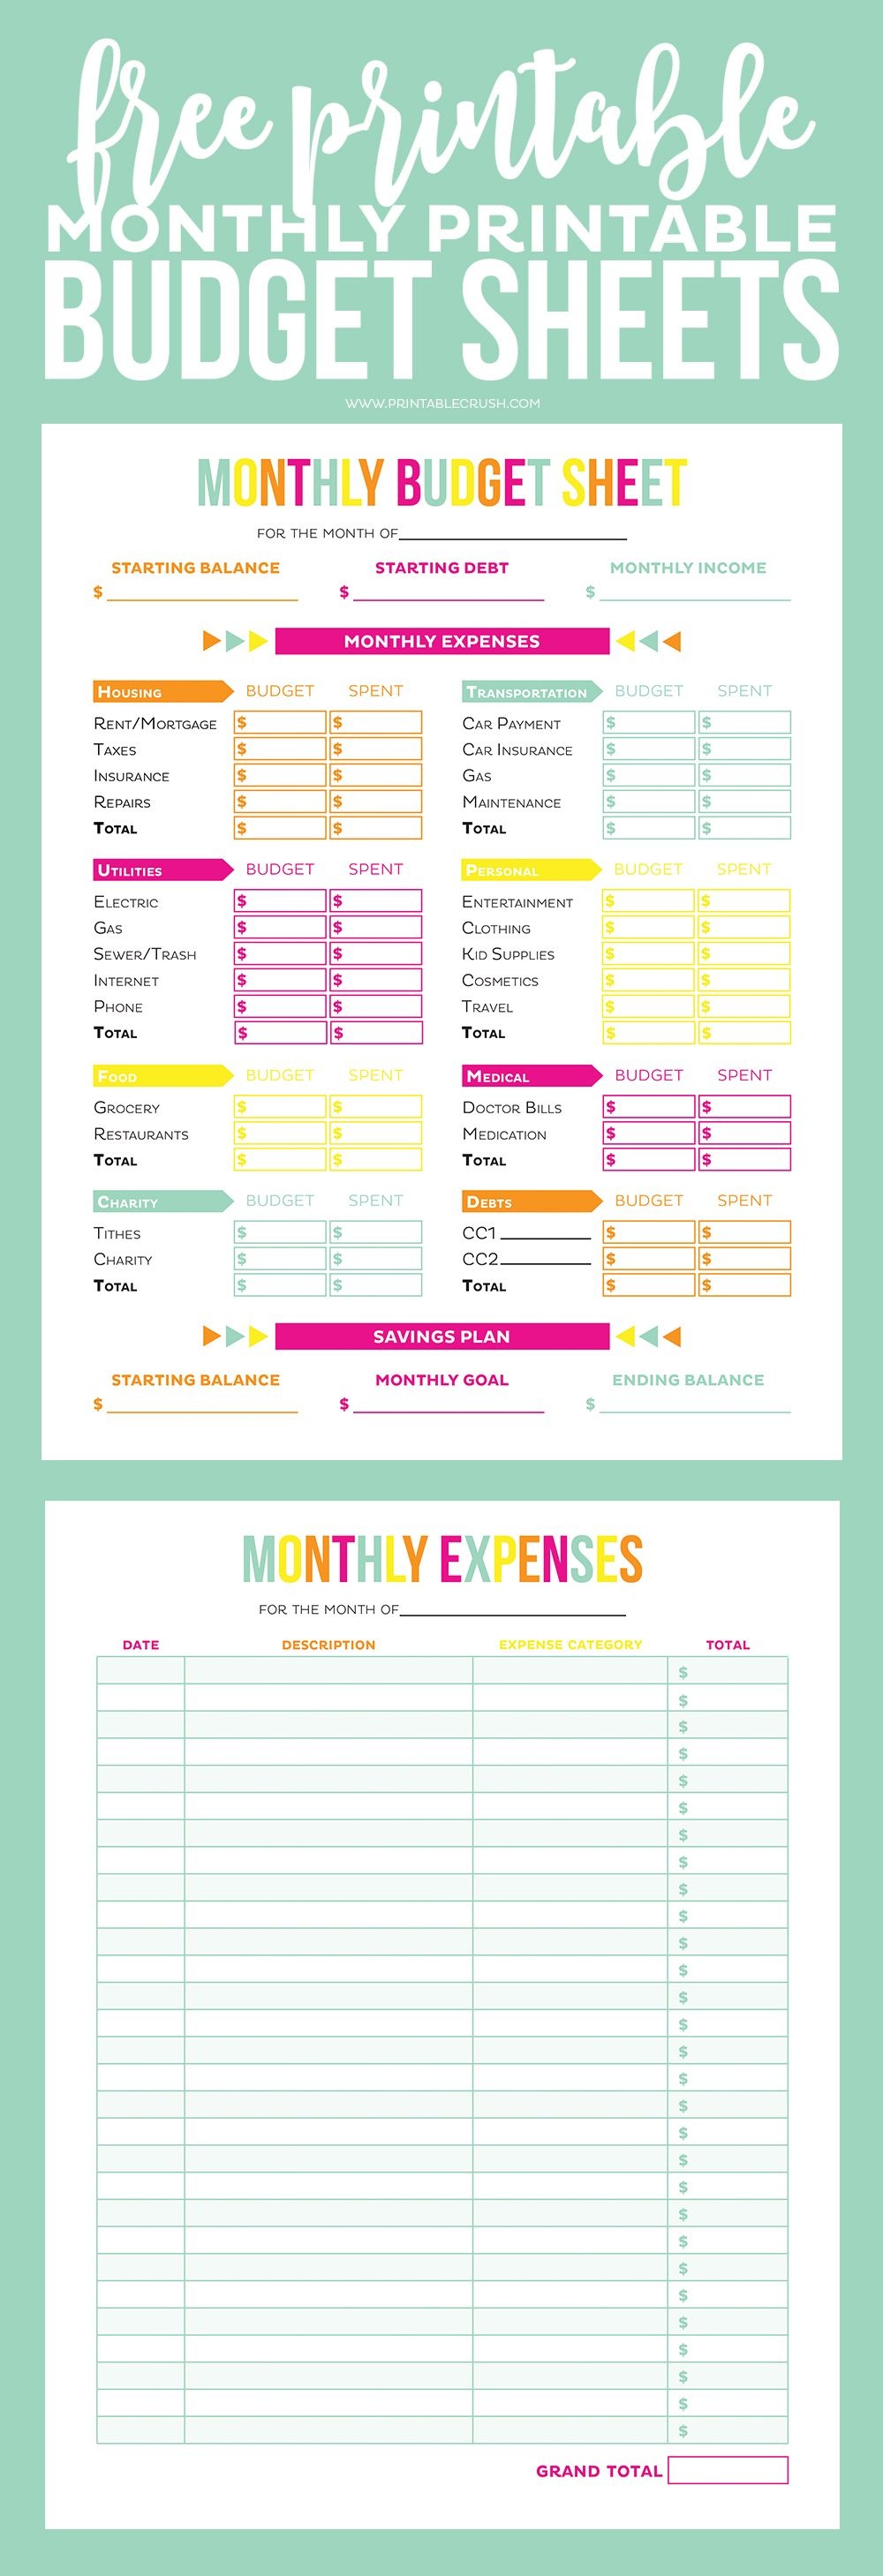 Get Your Finances In Order With These Free Printable Budget Sheets - Budgeting Charts Free Printable